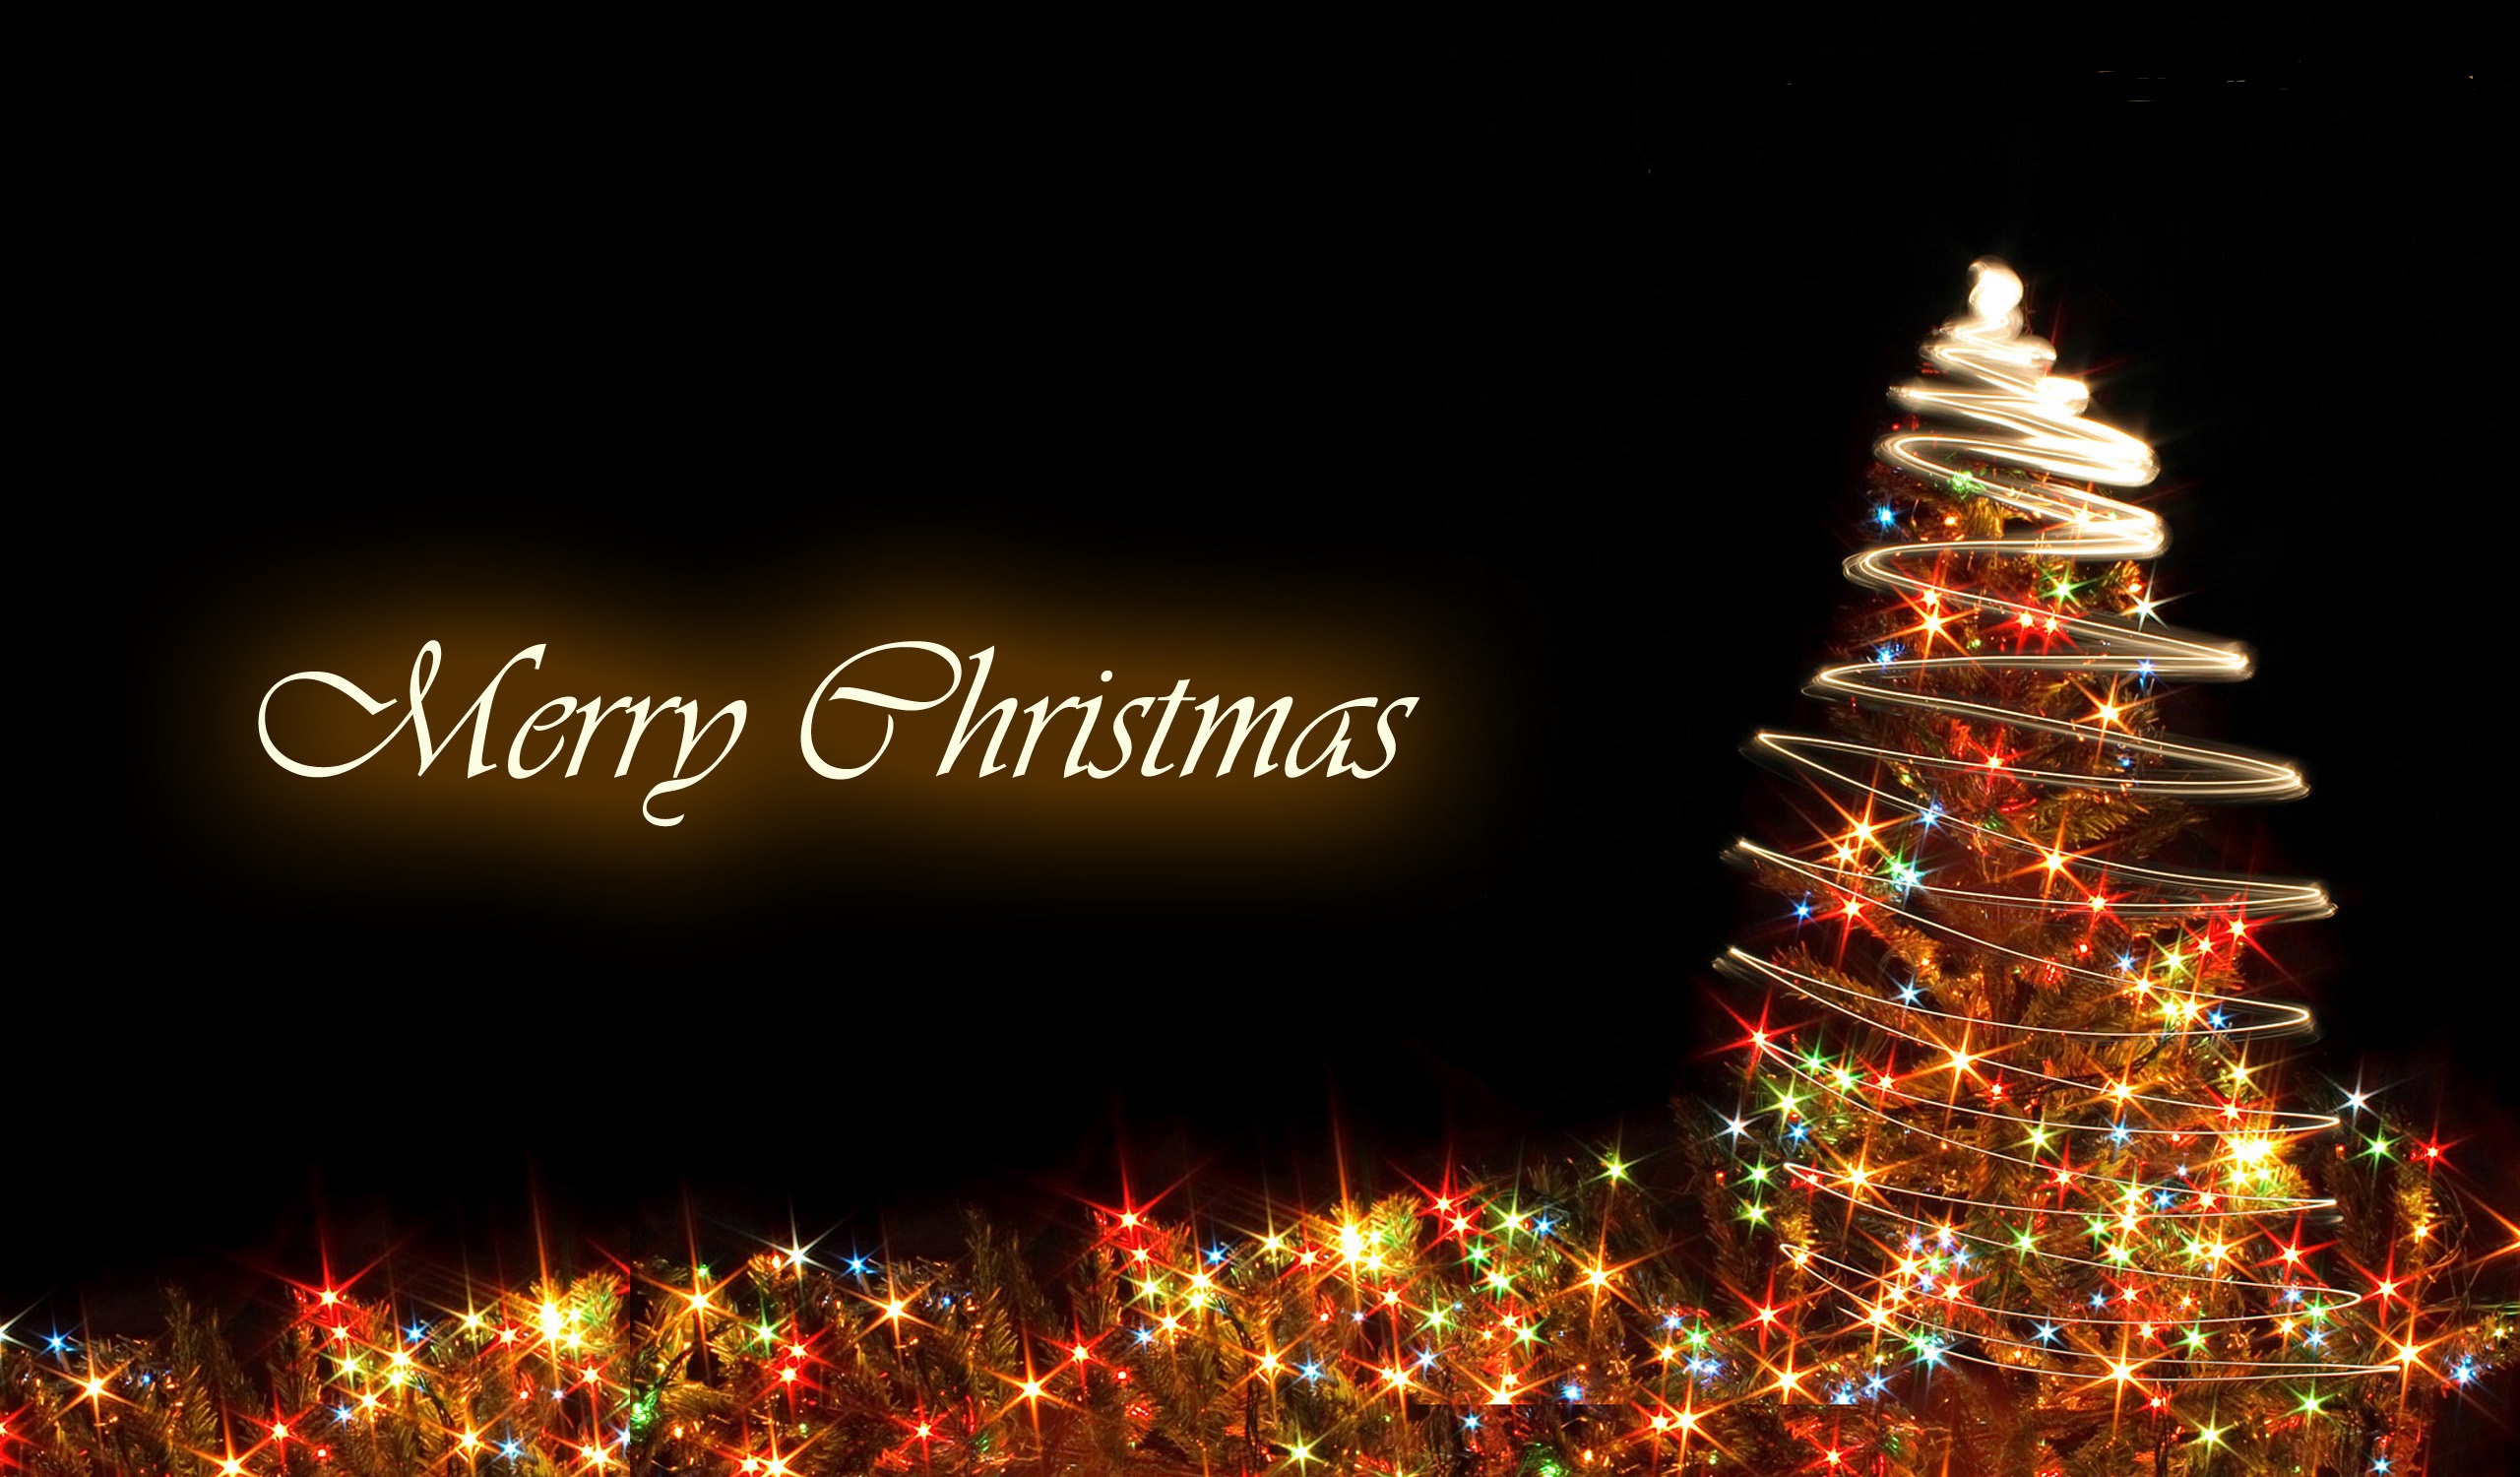 Merry Christmas Images Hd 2022 Free Download : Free Download Merry 